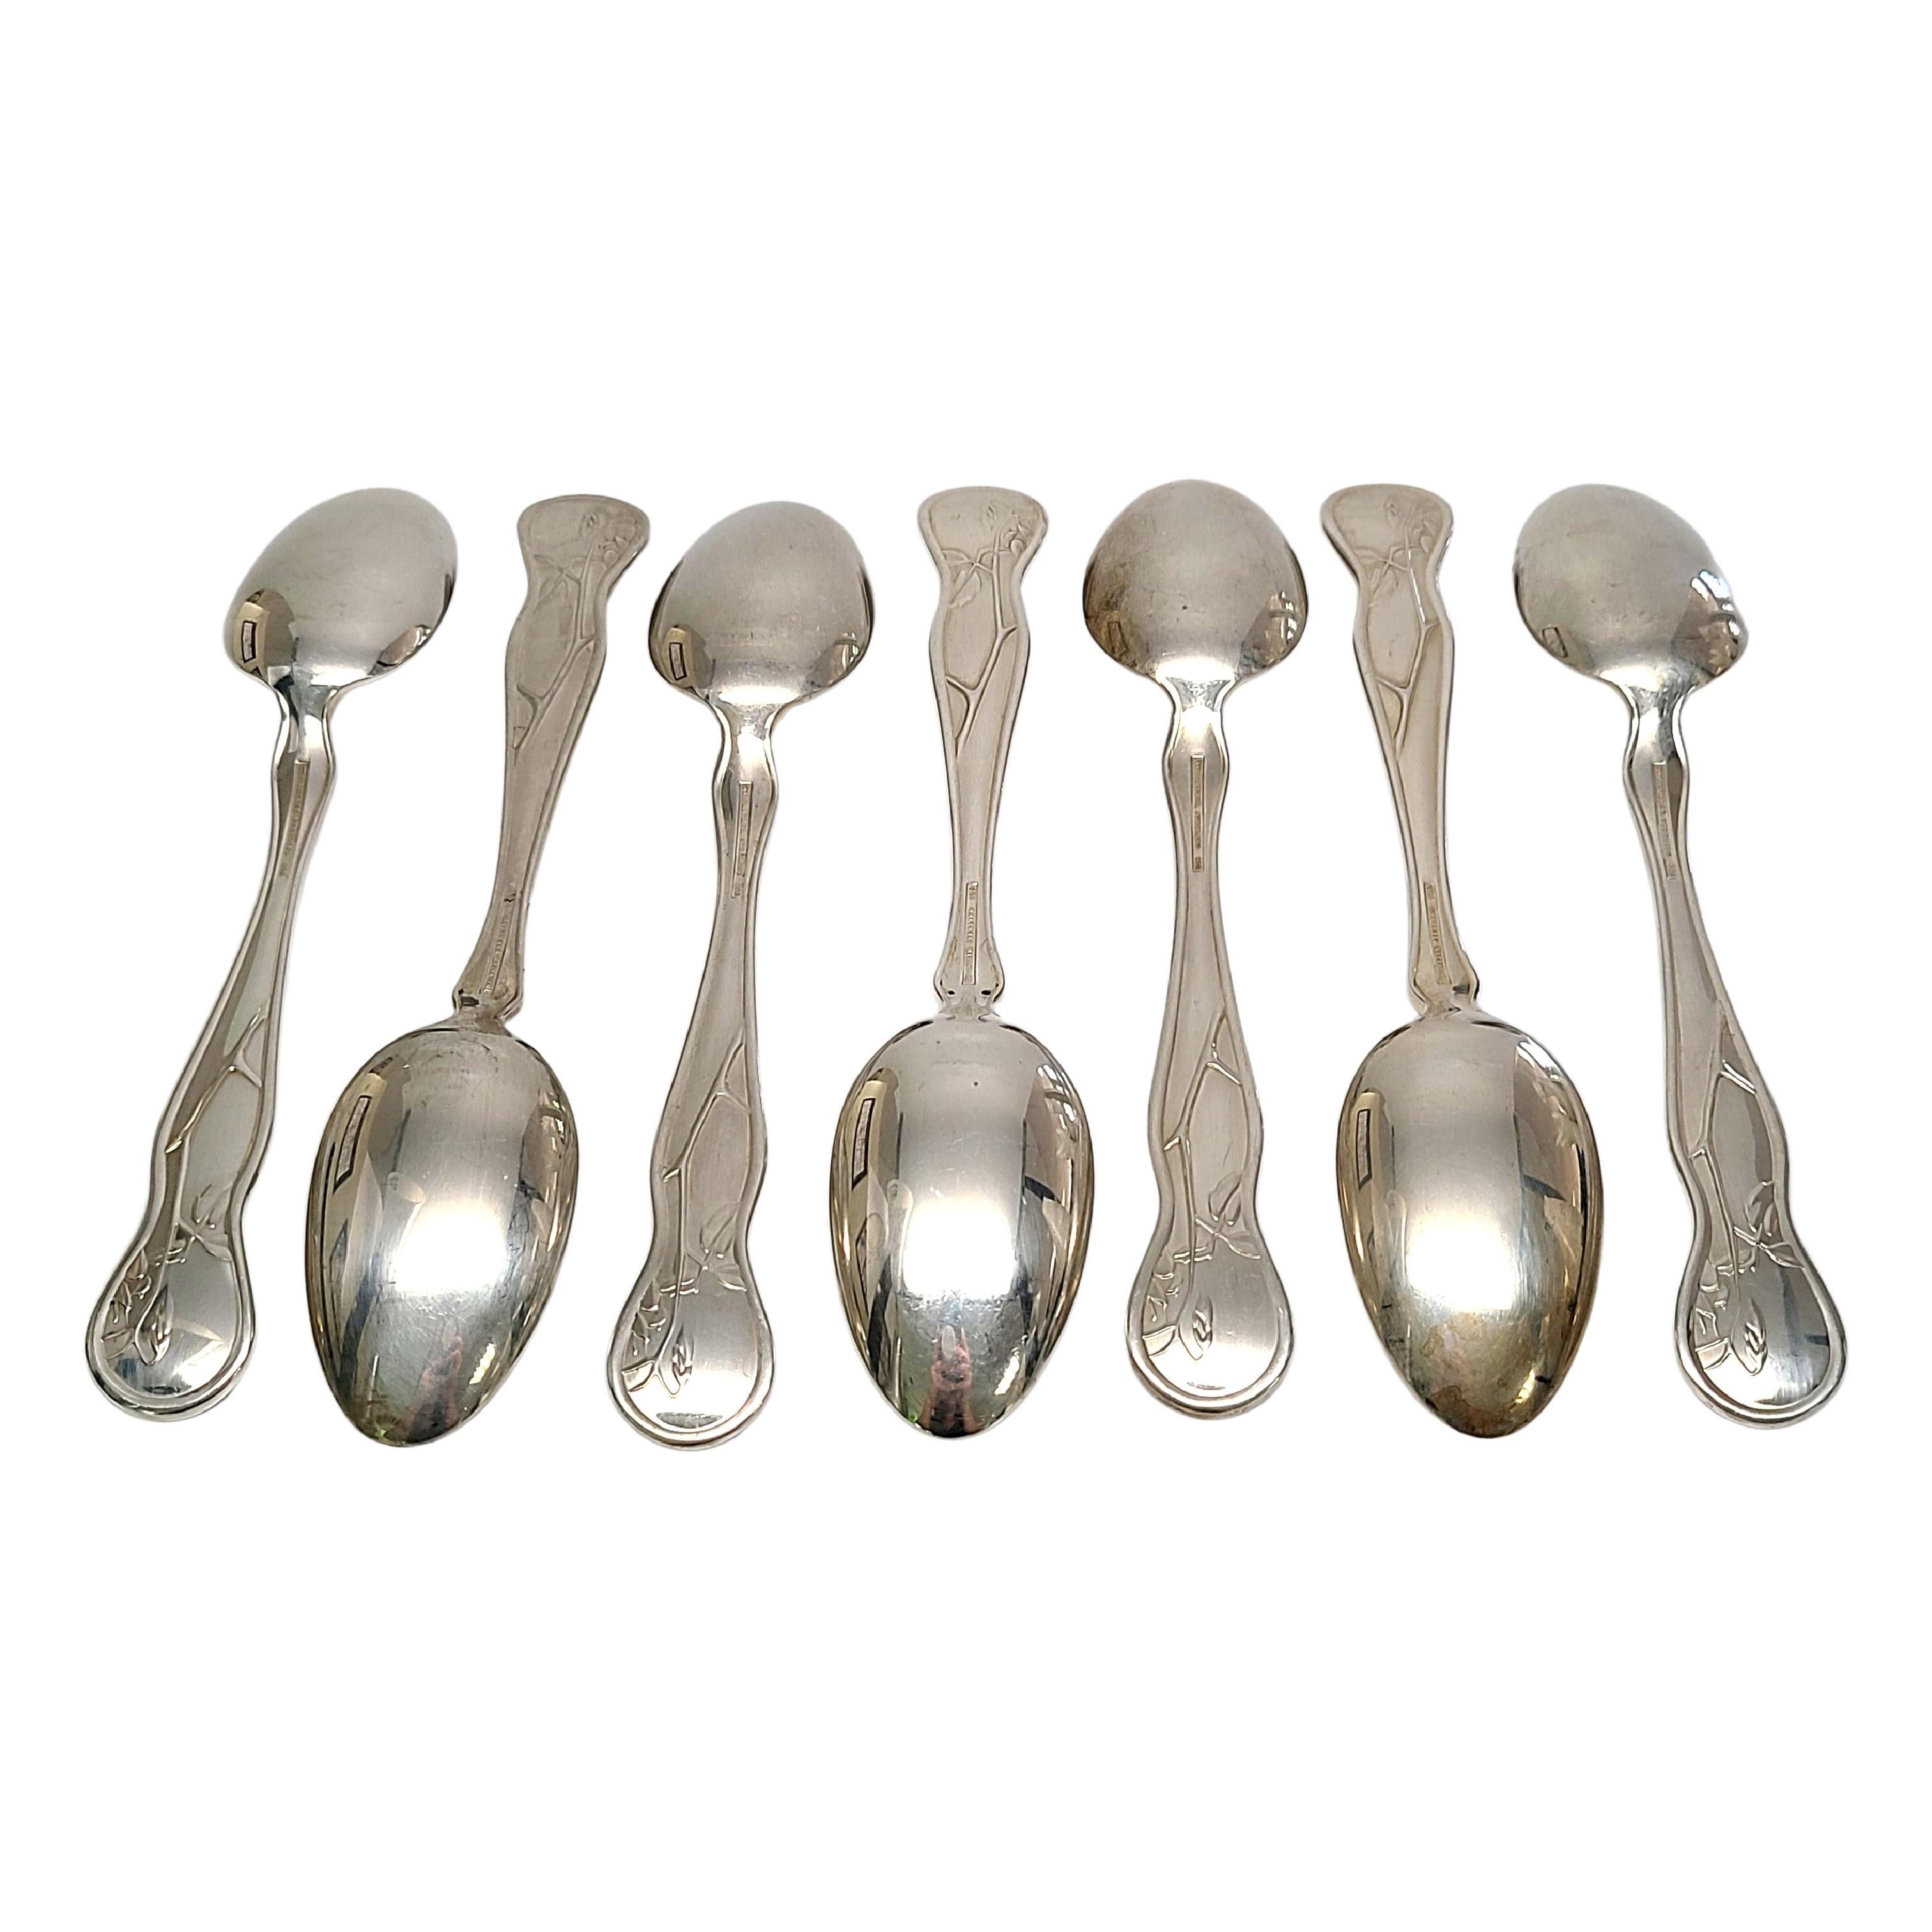 Set of 7 sterling silver dessert/oval soup spoons by Tiffany & Co in the American Garden pattern.

No monogram

American Garden is a multi-motif pattern inspired by the extensive botanical beauty of the United States. Does not include Tiffany box or